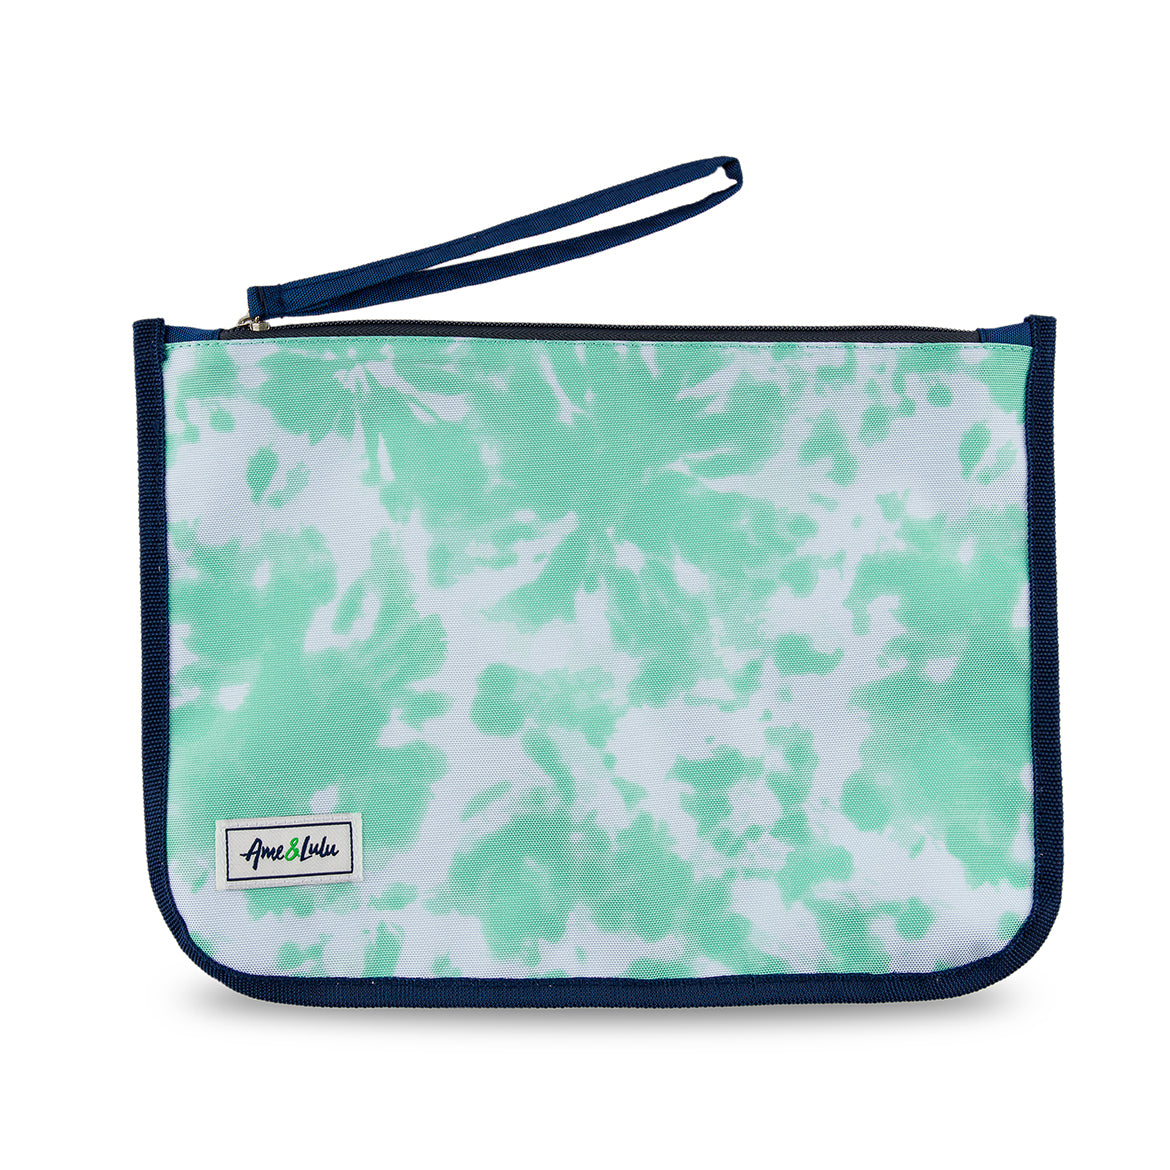 mint green and white tie dye nylon zip pouch with wrist strap